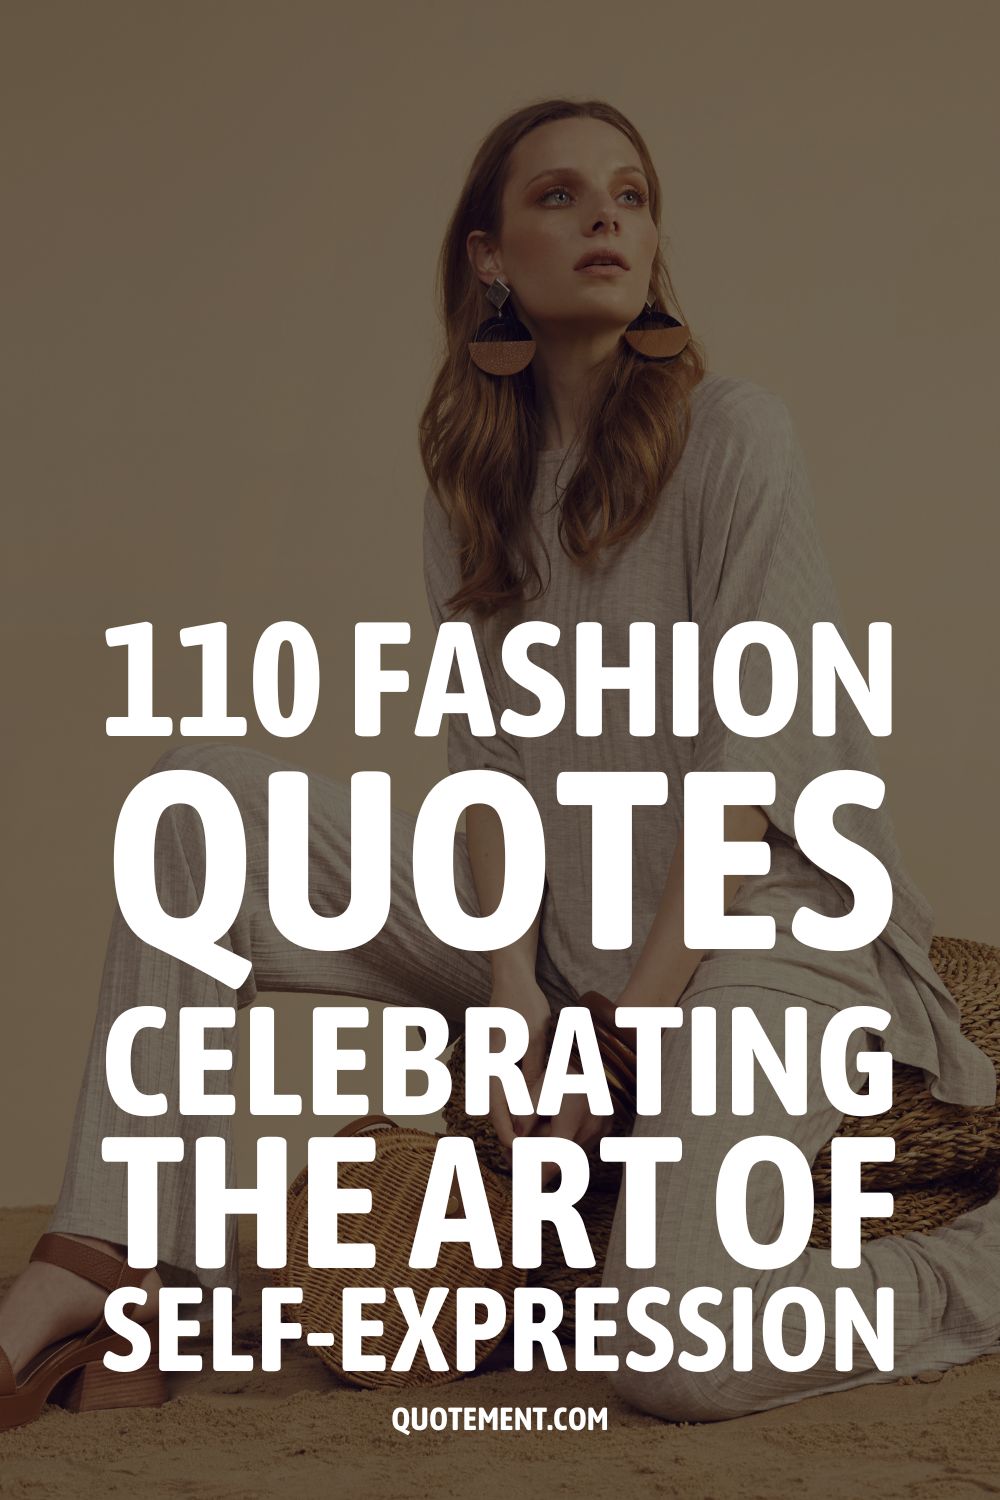 110 Fashion Quotes Celebrating The Art Of Self-Expression